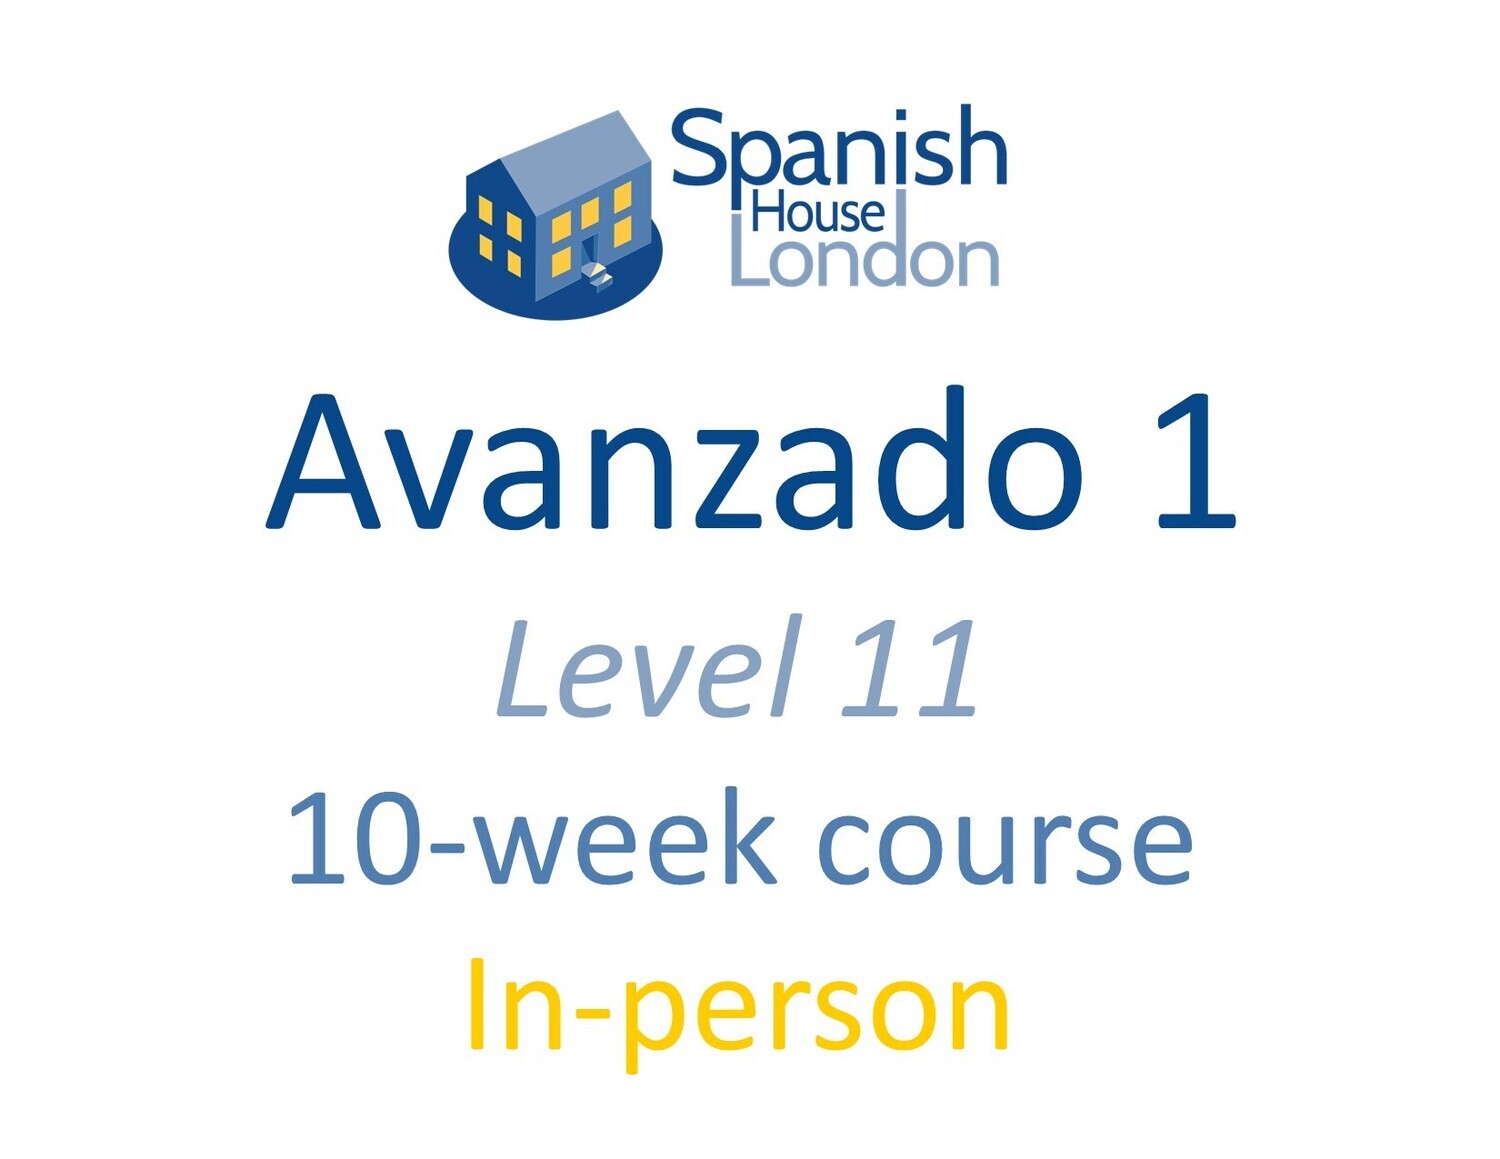 Avanzado 1 Course starting on 8th February at 7.30pm in Euston / King's Cross